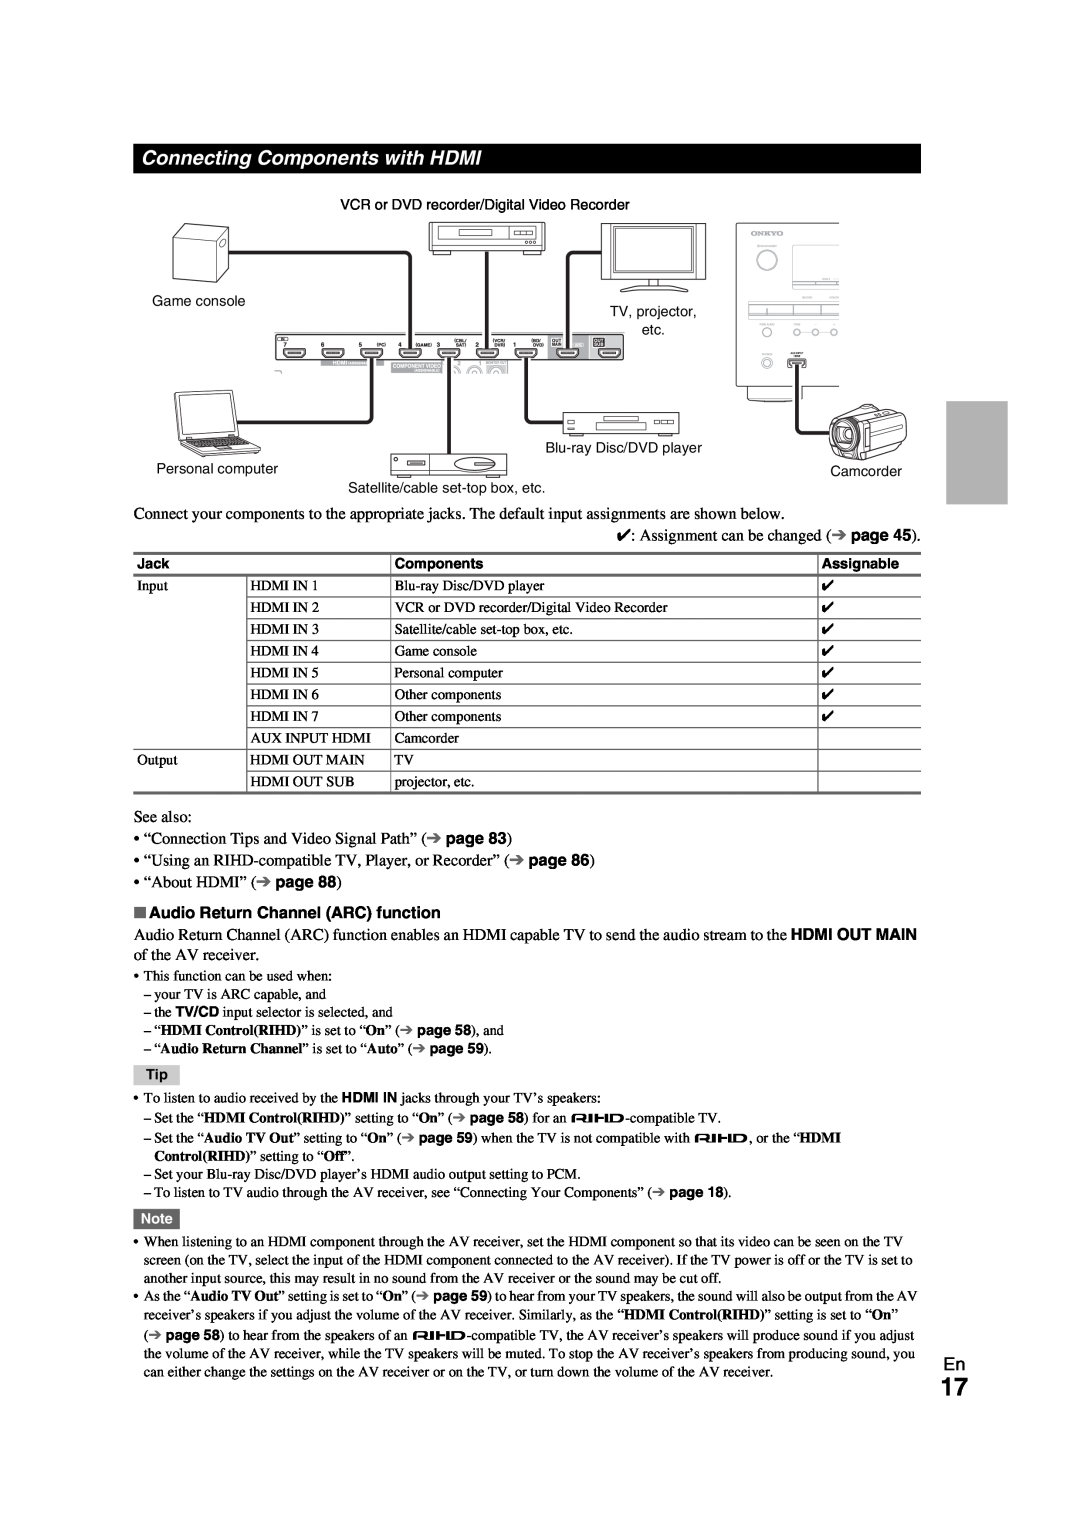 Onkyo TX-NR709 instruction manual Connecting Components with HDMI, Audio Return Channel ARC function 